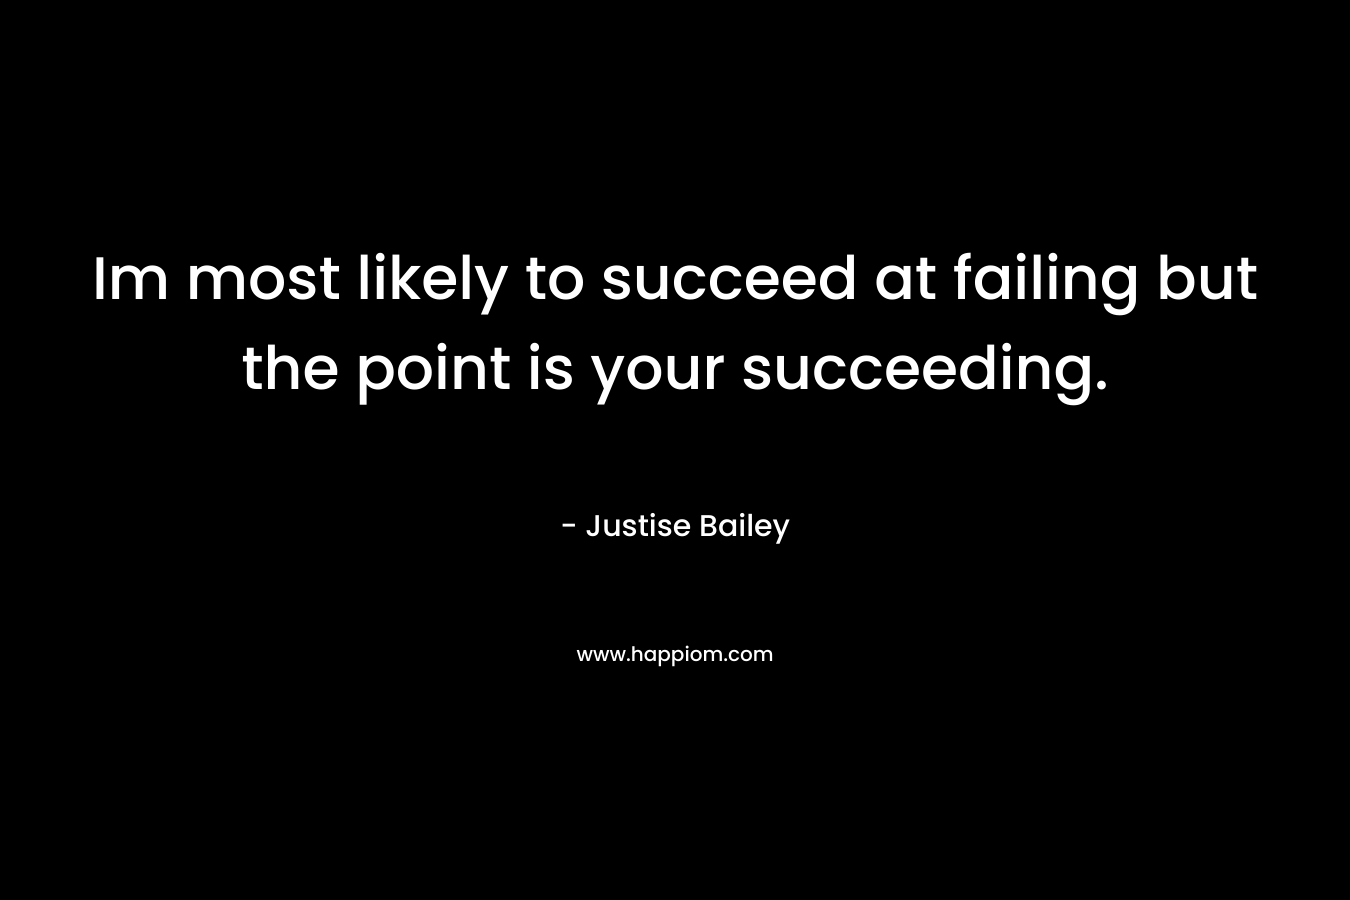 Im most likely to succeed at failing but the point is your succeeding. – Justise Bailey